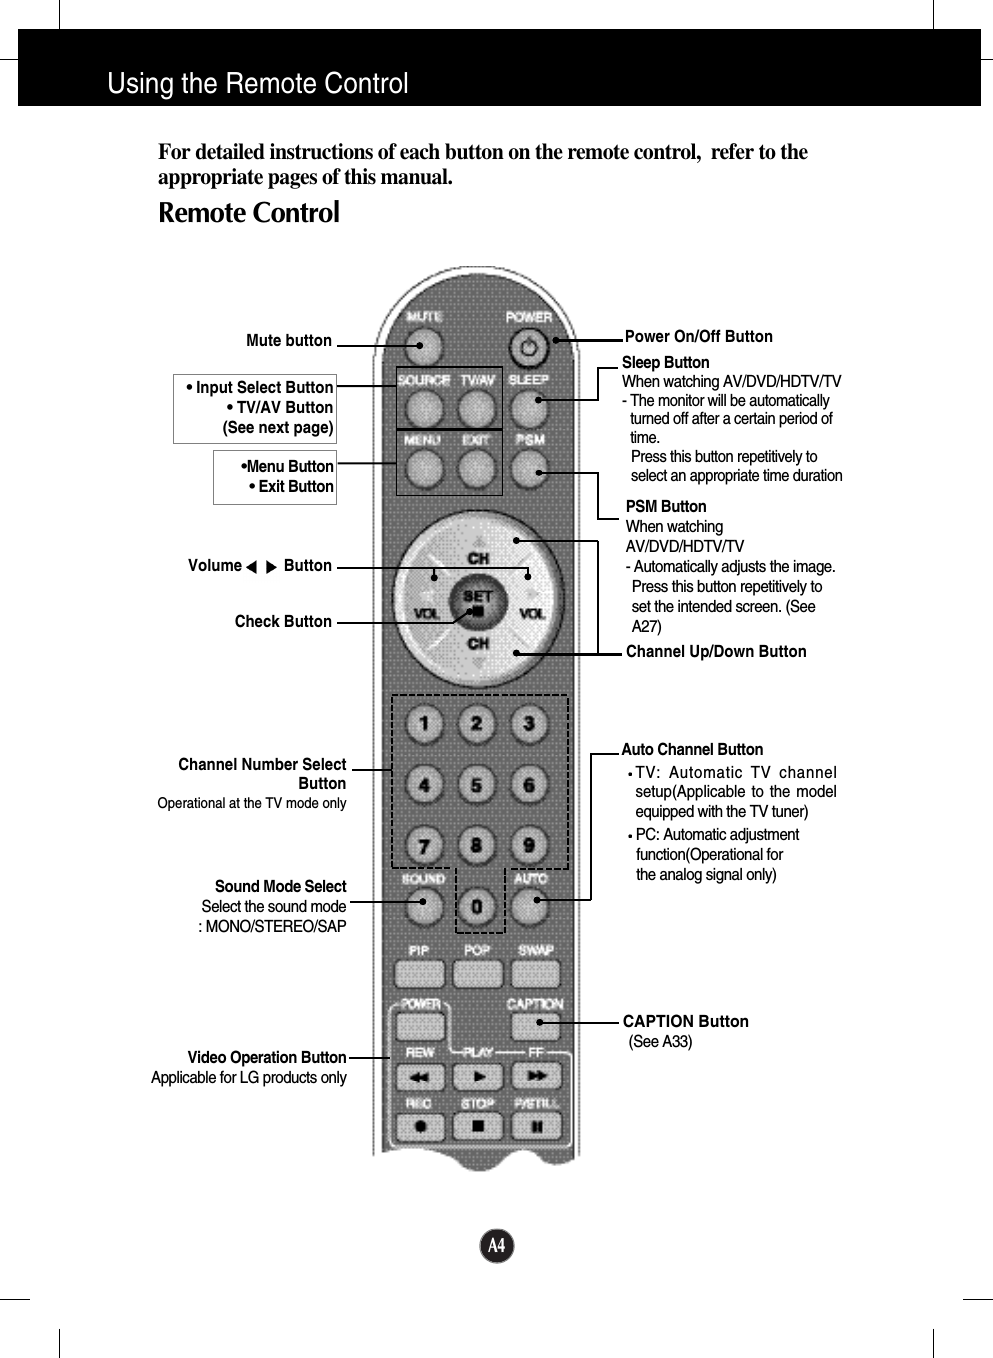 A4Using the Remote ControlRemote ControlFor detailed instructions of each button on the remote control,  refer to theappropriate pages of this manual.Power On/Off ButtonChannel Up/Down Button•Input Select Button•TV/AV Button(See next page)Sleep ButtonWhen watching AV/DVD/HDTV/TV - The monitor will be automaticallyturned off after a certain period oftime.Press this button repetitively toselect an appropriate time durationPSM ButtonWhen watchingAV/DVD/HDTV/TV- Automatically adjusts the image.Press this button repetitively toset the intended screen. (SeeA27)CAPTION Button(See A33)•Menu Button•Exit ButtonAuto Channel ButtonTV: Automatic TV channelsetup(Applicable to the modelequipped with the TV tuner)PC: Automatic adjustment function(Operational for the analog signal only)Channel Number SelectButtonOperational at the TV mode onlyCheck ButtonSound Mode SelectSelect the sound mode: MONO/STEREO/SAPVideo Operation ButtonApplicable for LG products onlyVolume          ButtonMute button